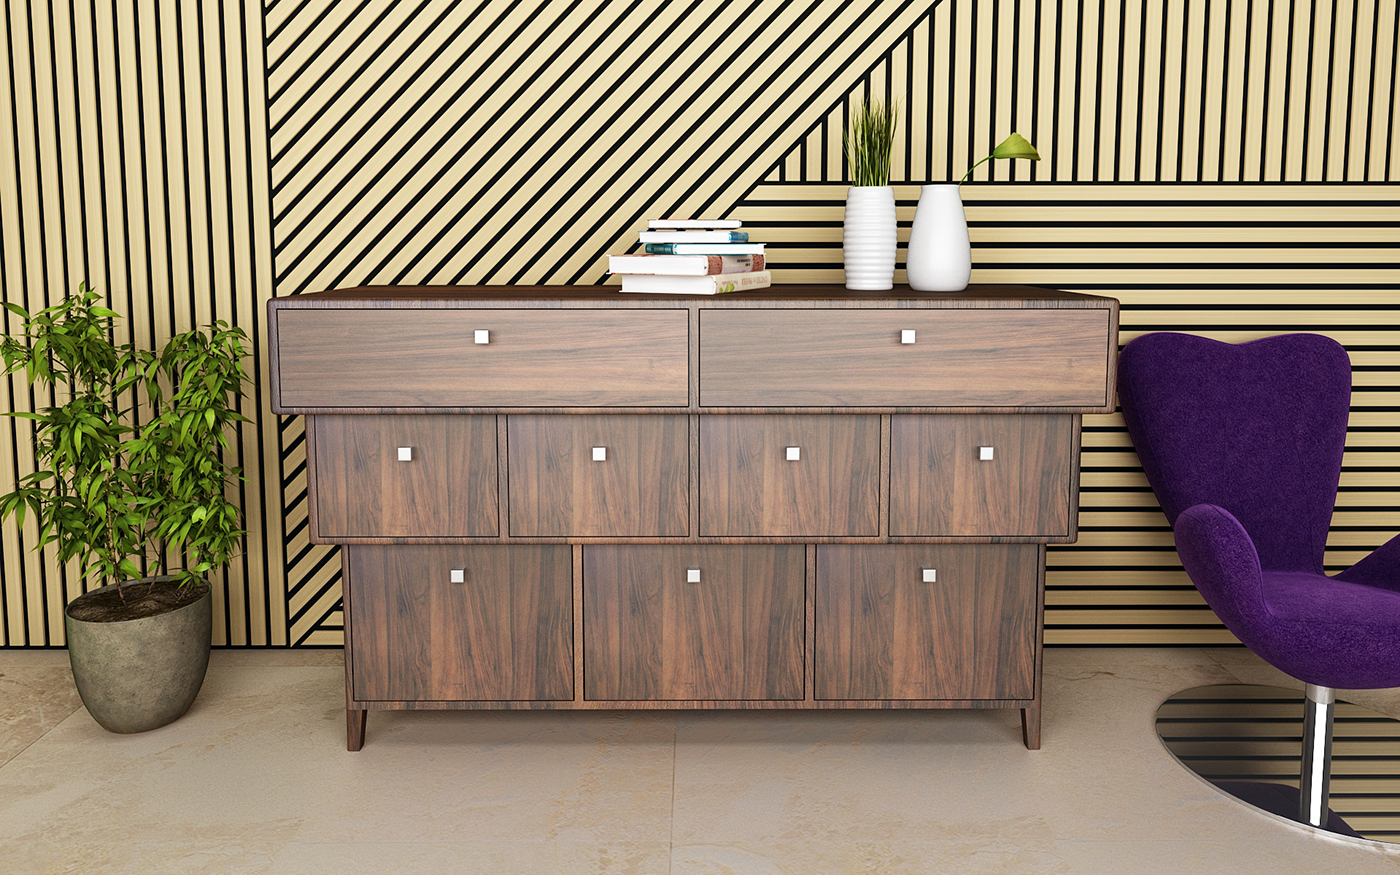 Cabinets design furniture dragangraovcevic